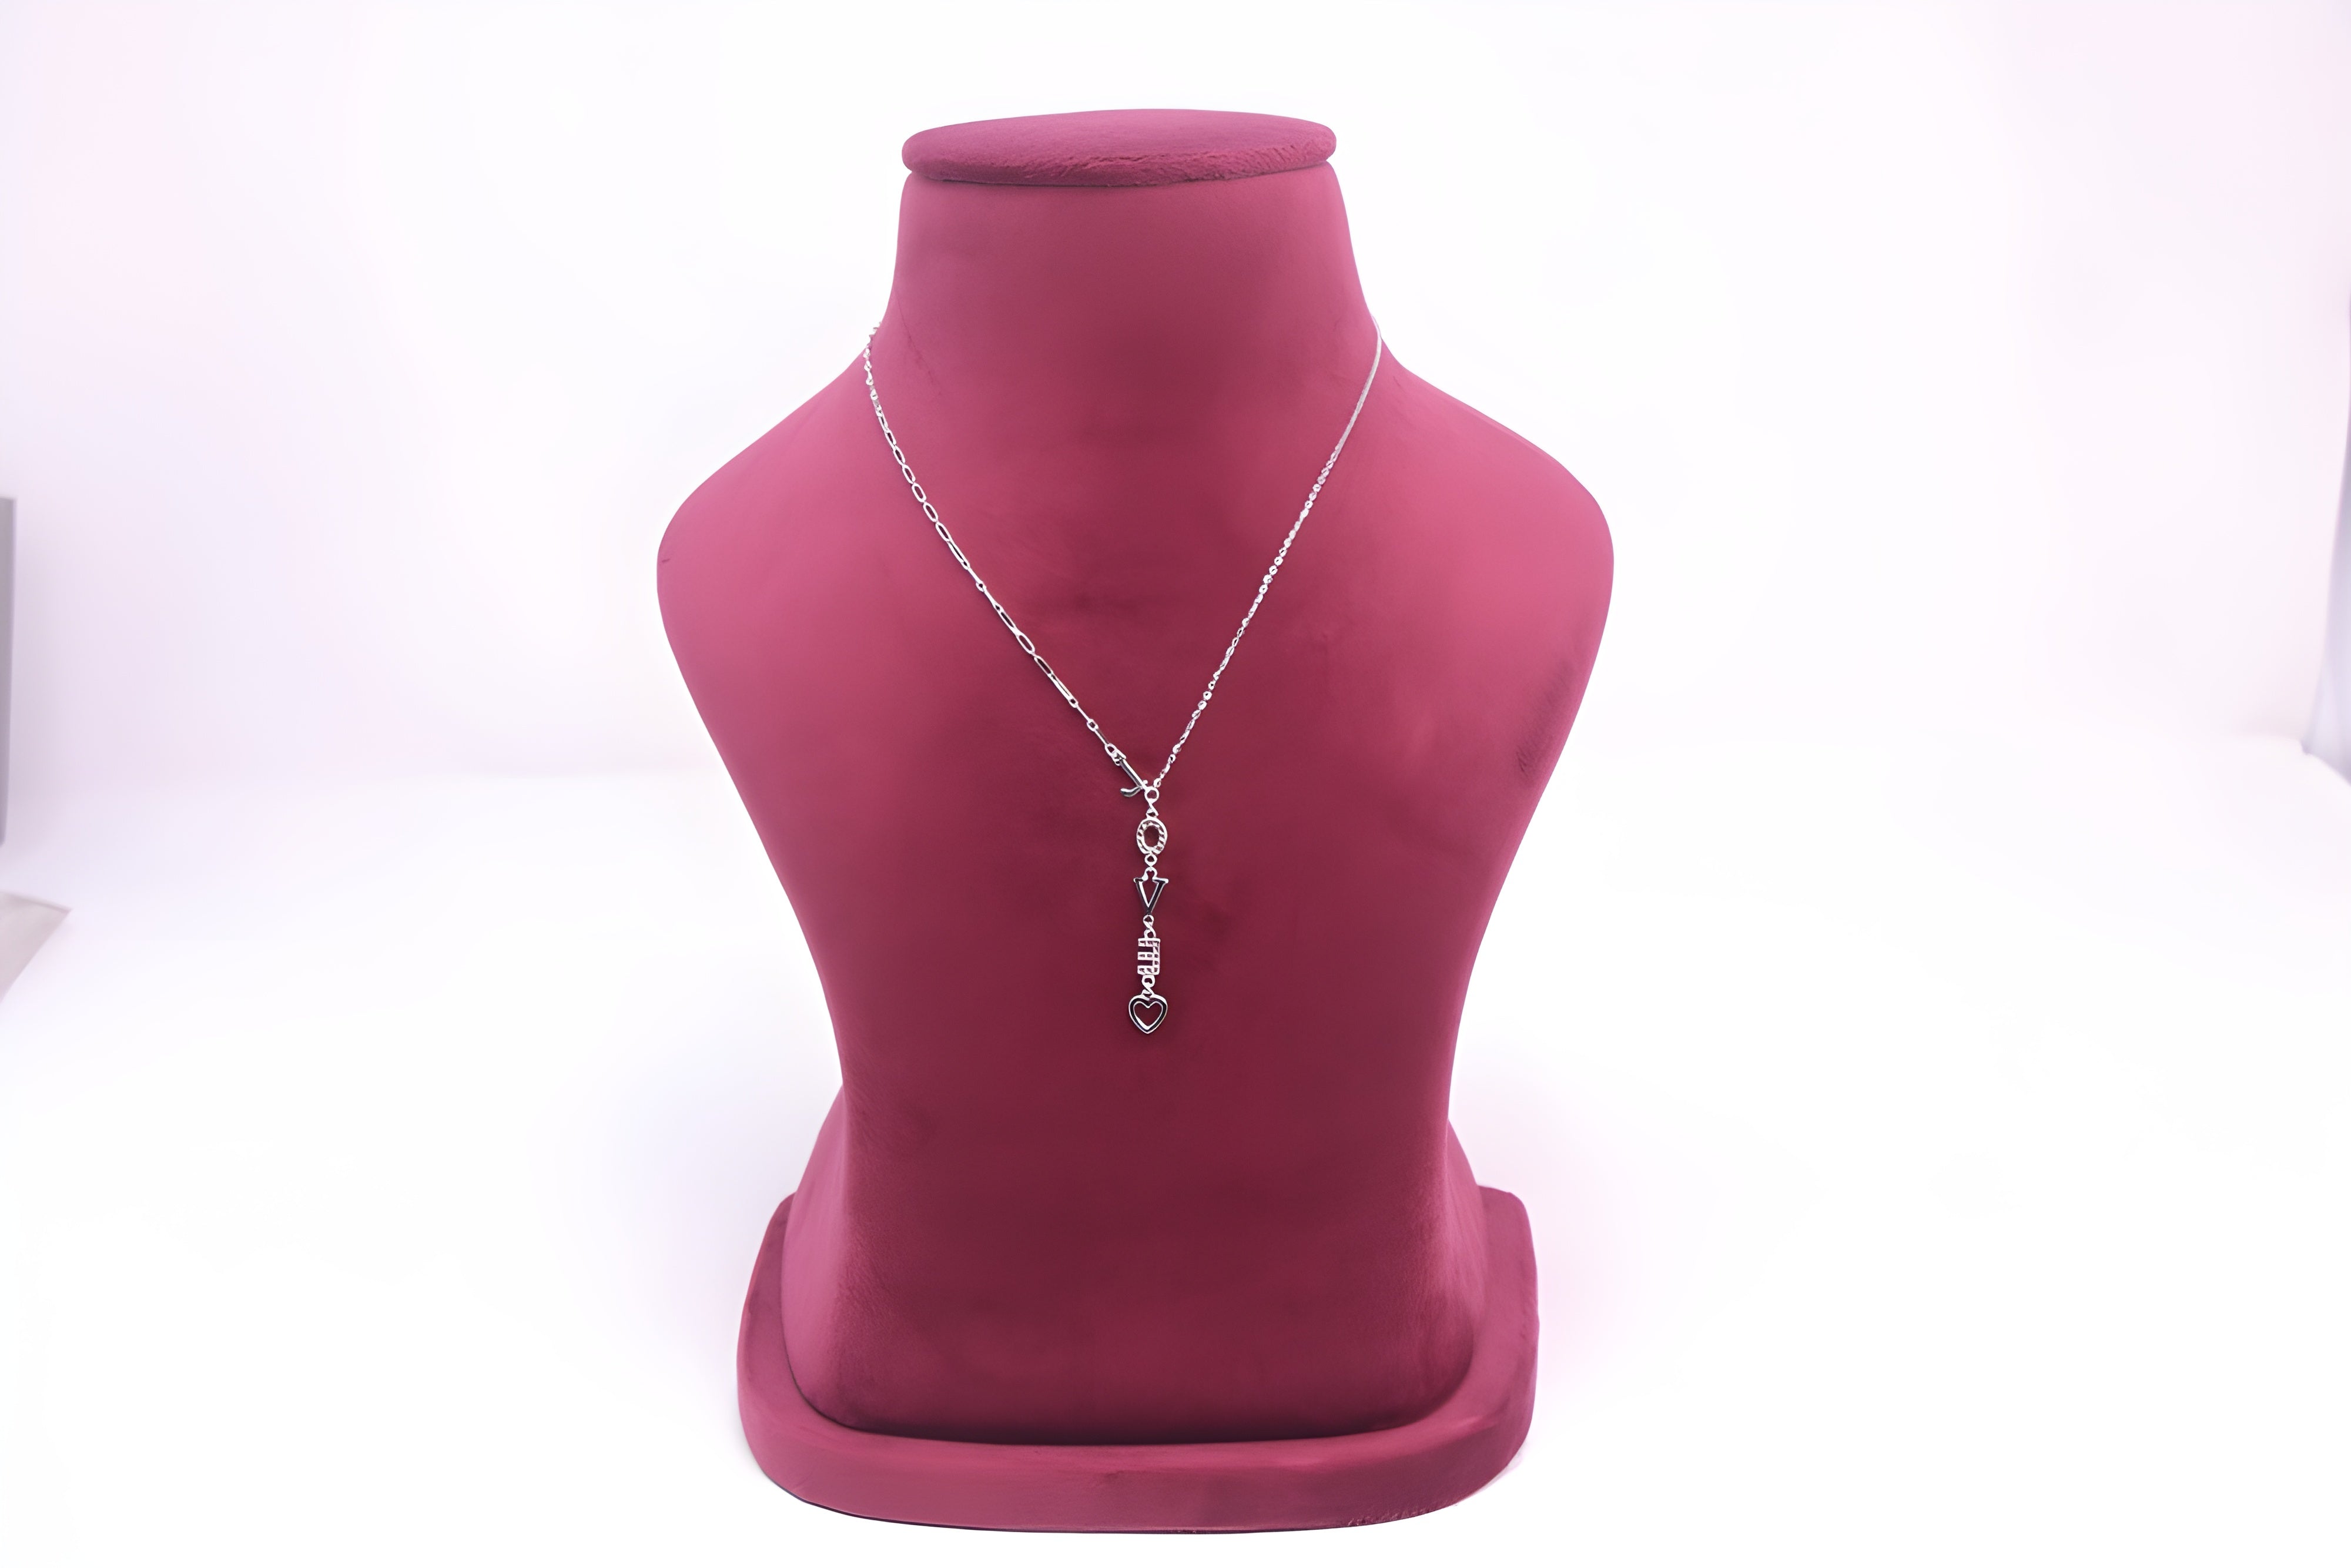 LOVE Letter Pendant in 92.5 Sterling Silver with Swarovski Crystals